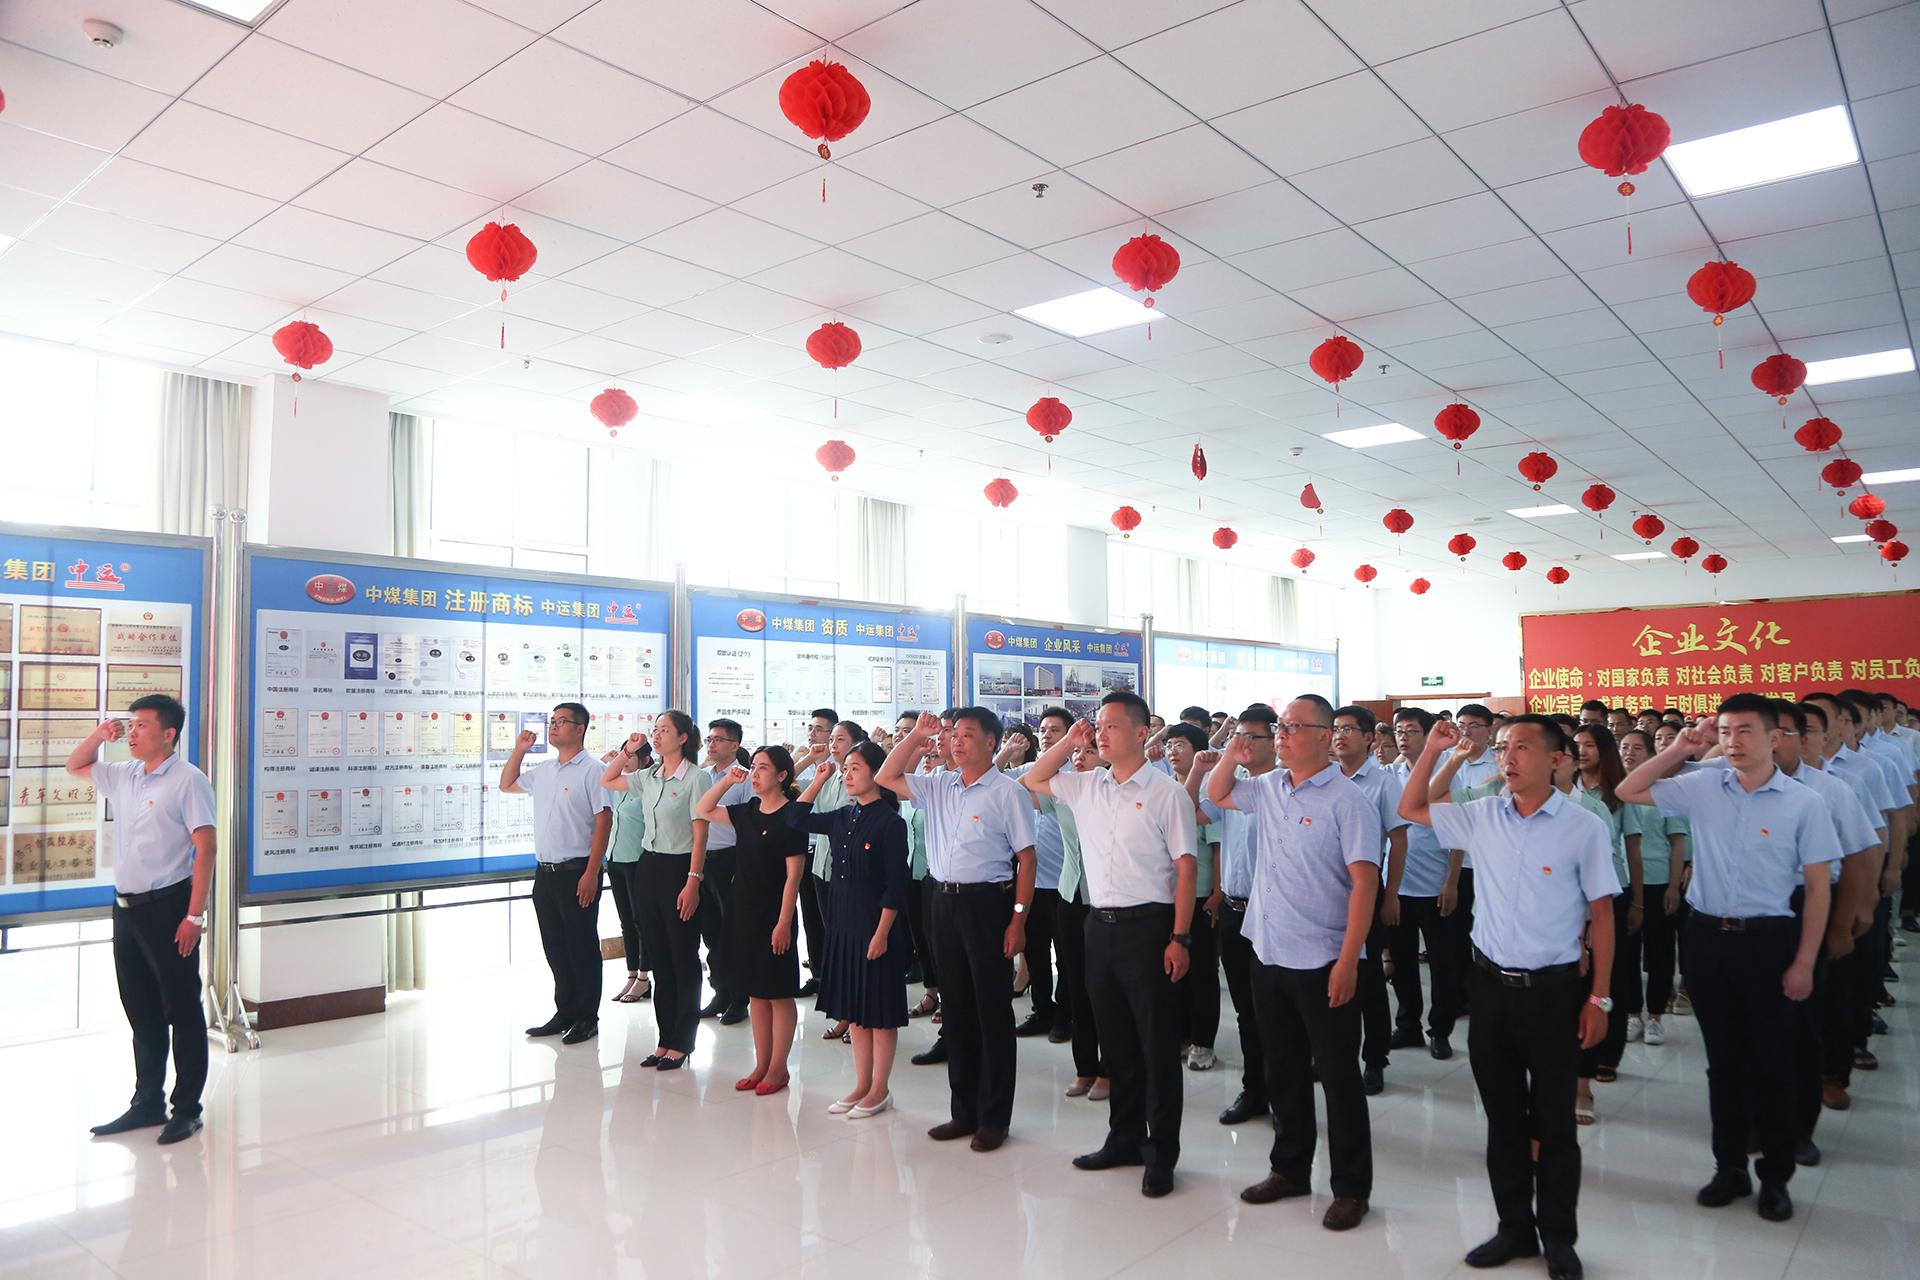 Shandong Lvbei Held An Event Celebrating The 99th Anniversary Of The Founding Of The Party